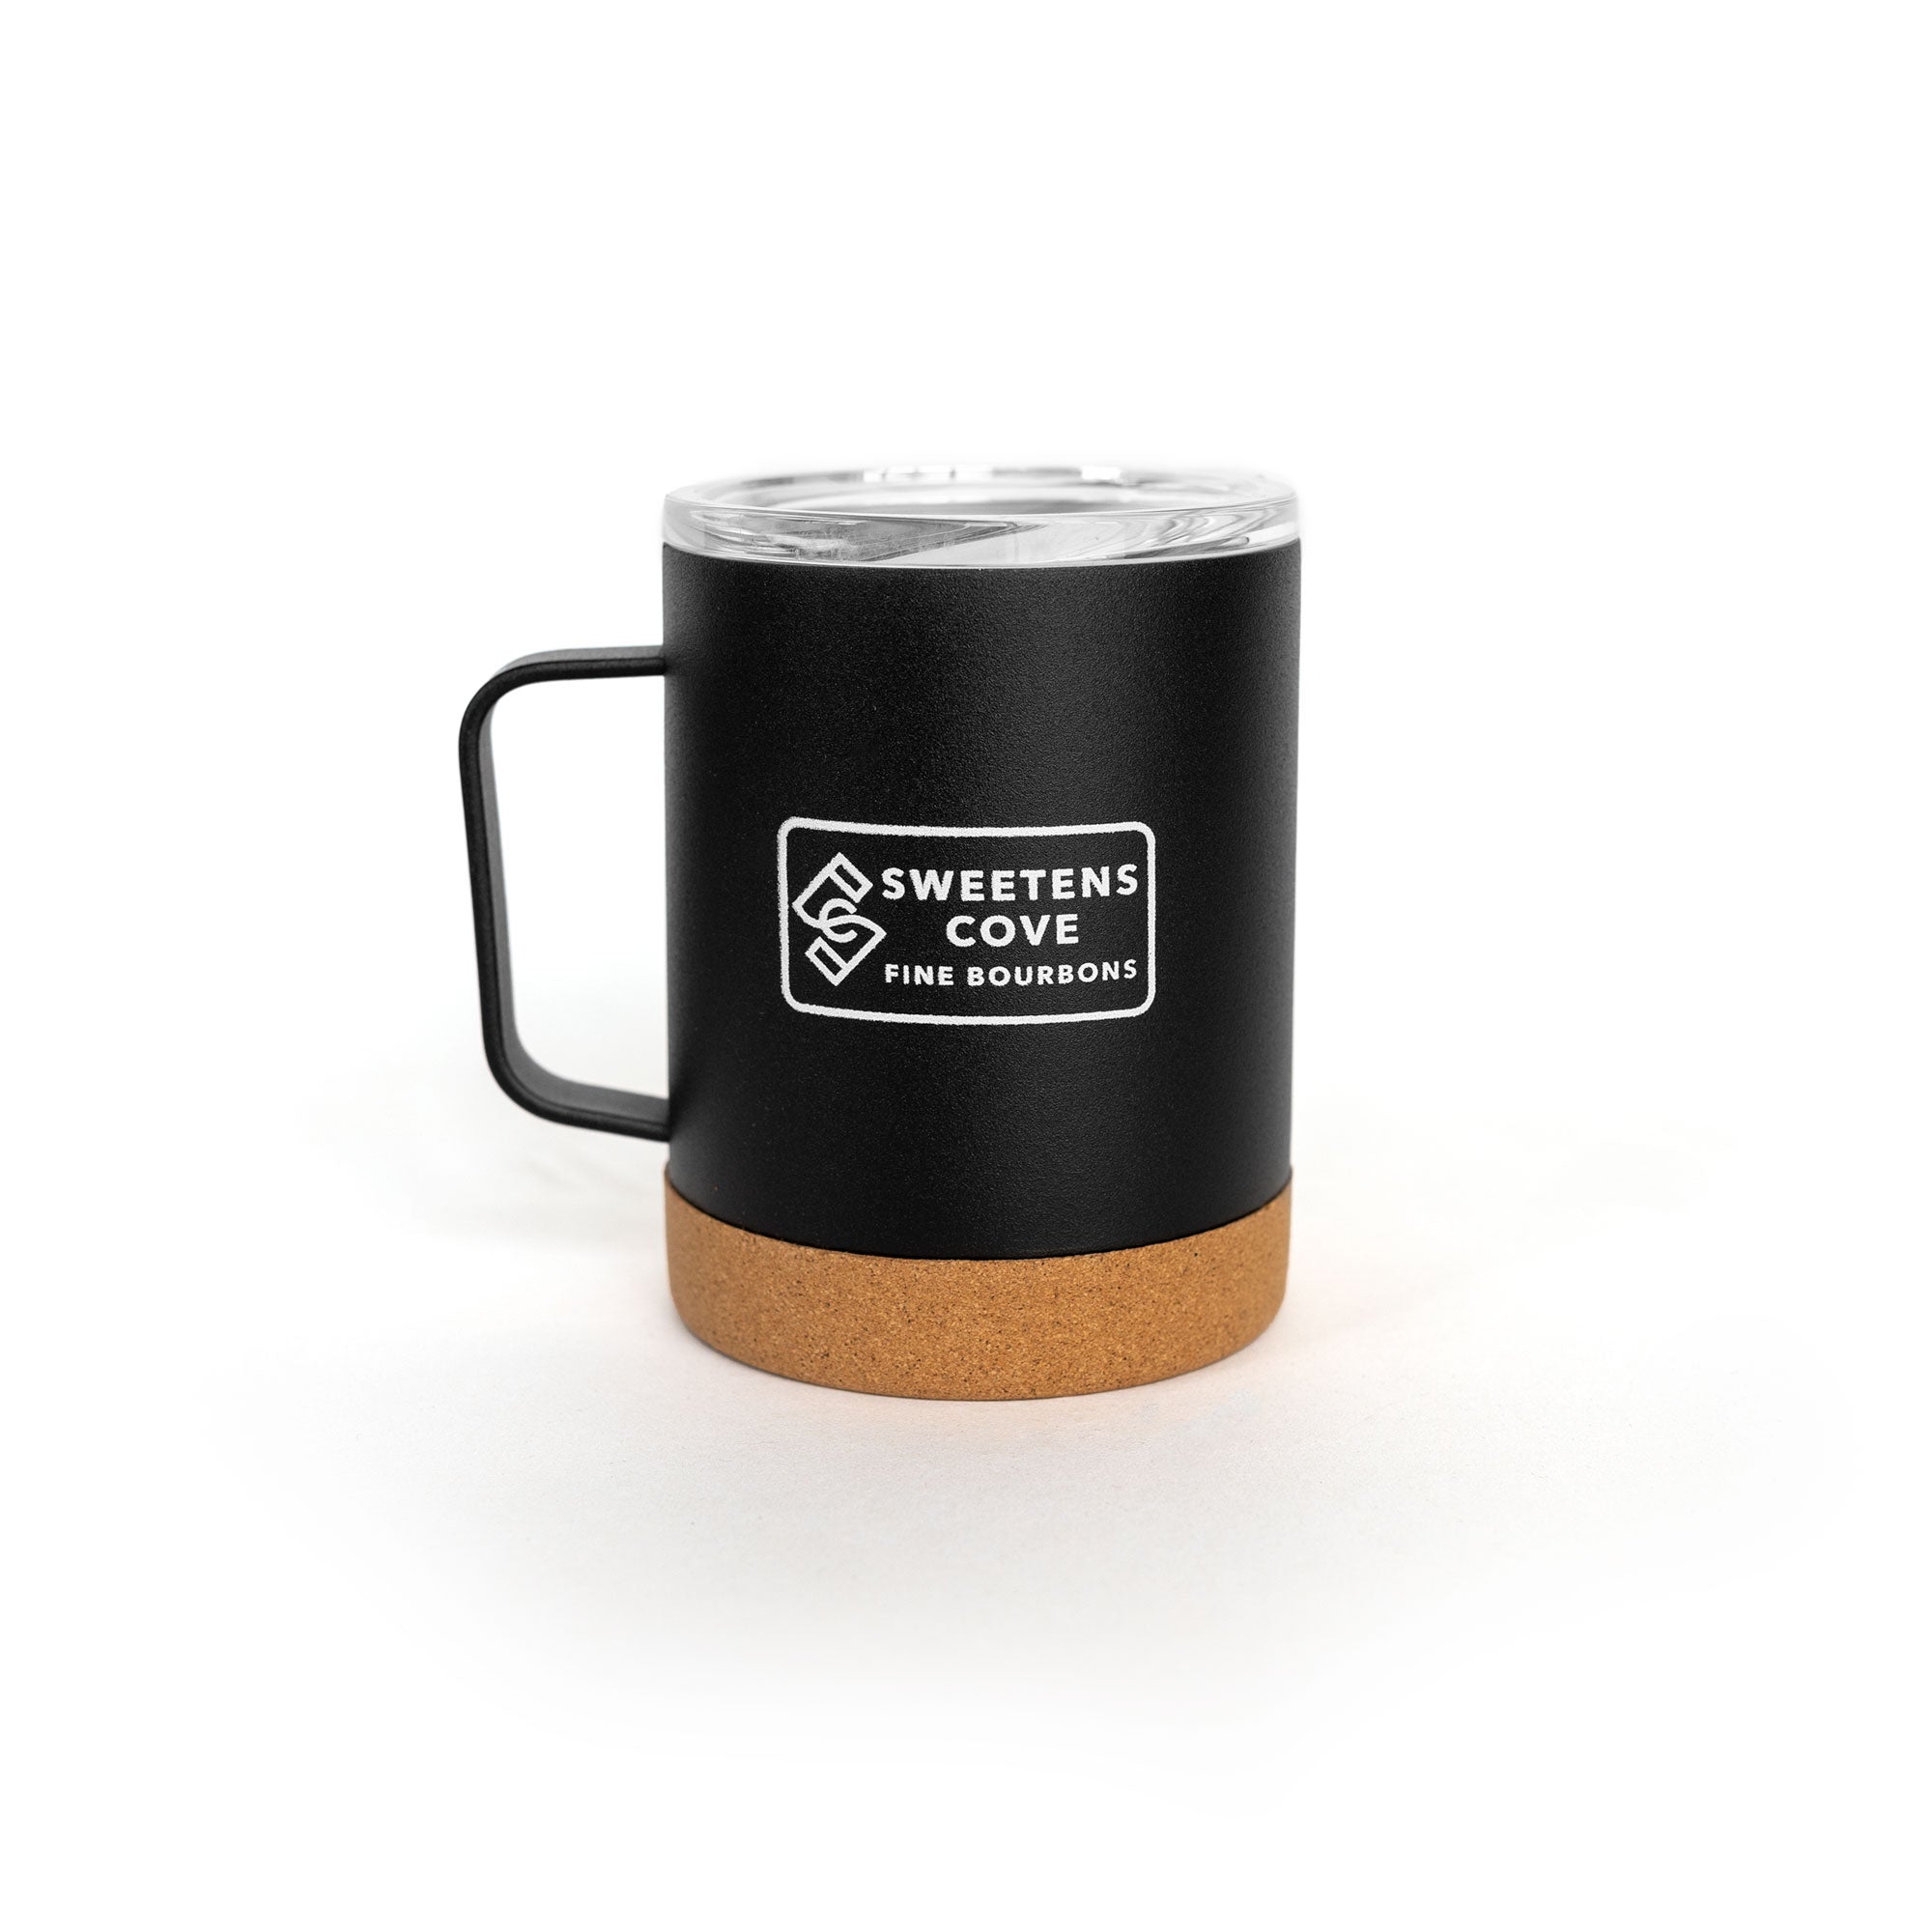 This Is Probably Whiskey Stainless Steel Tumbler